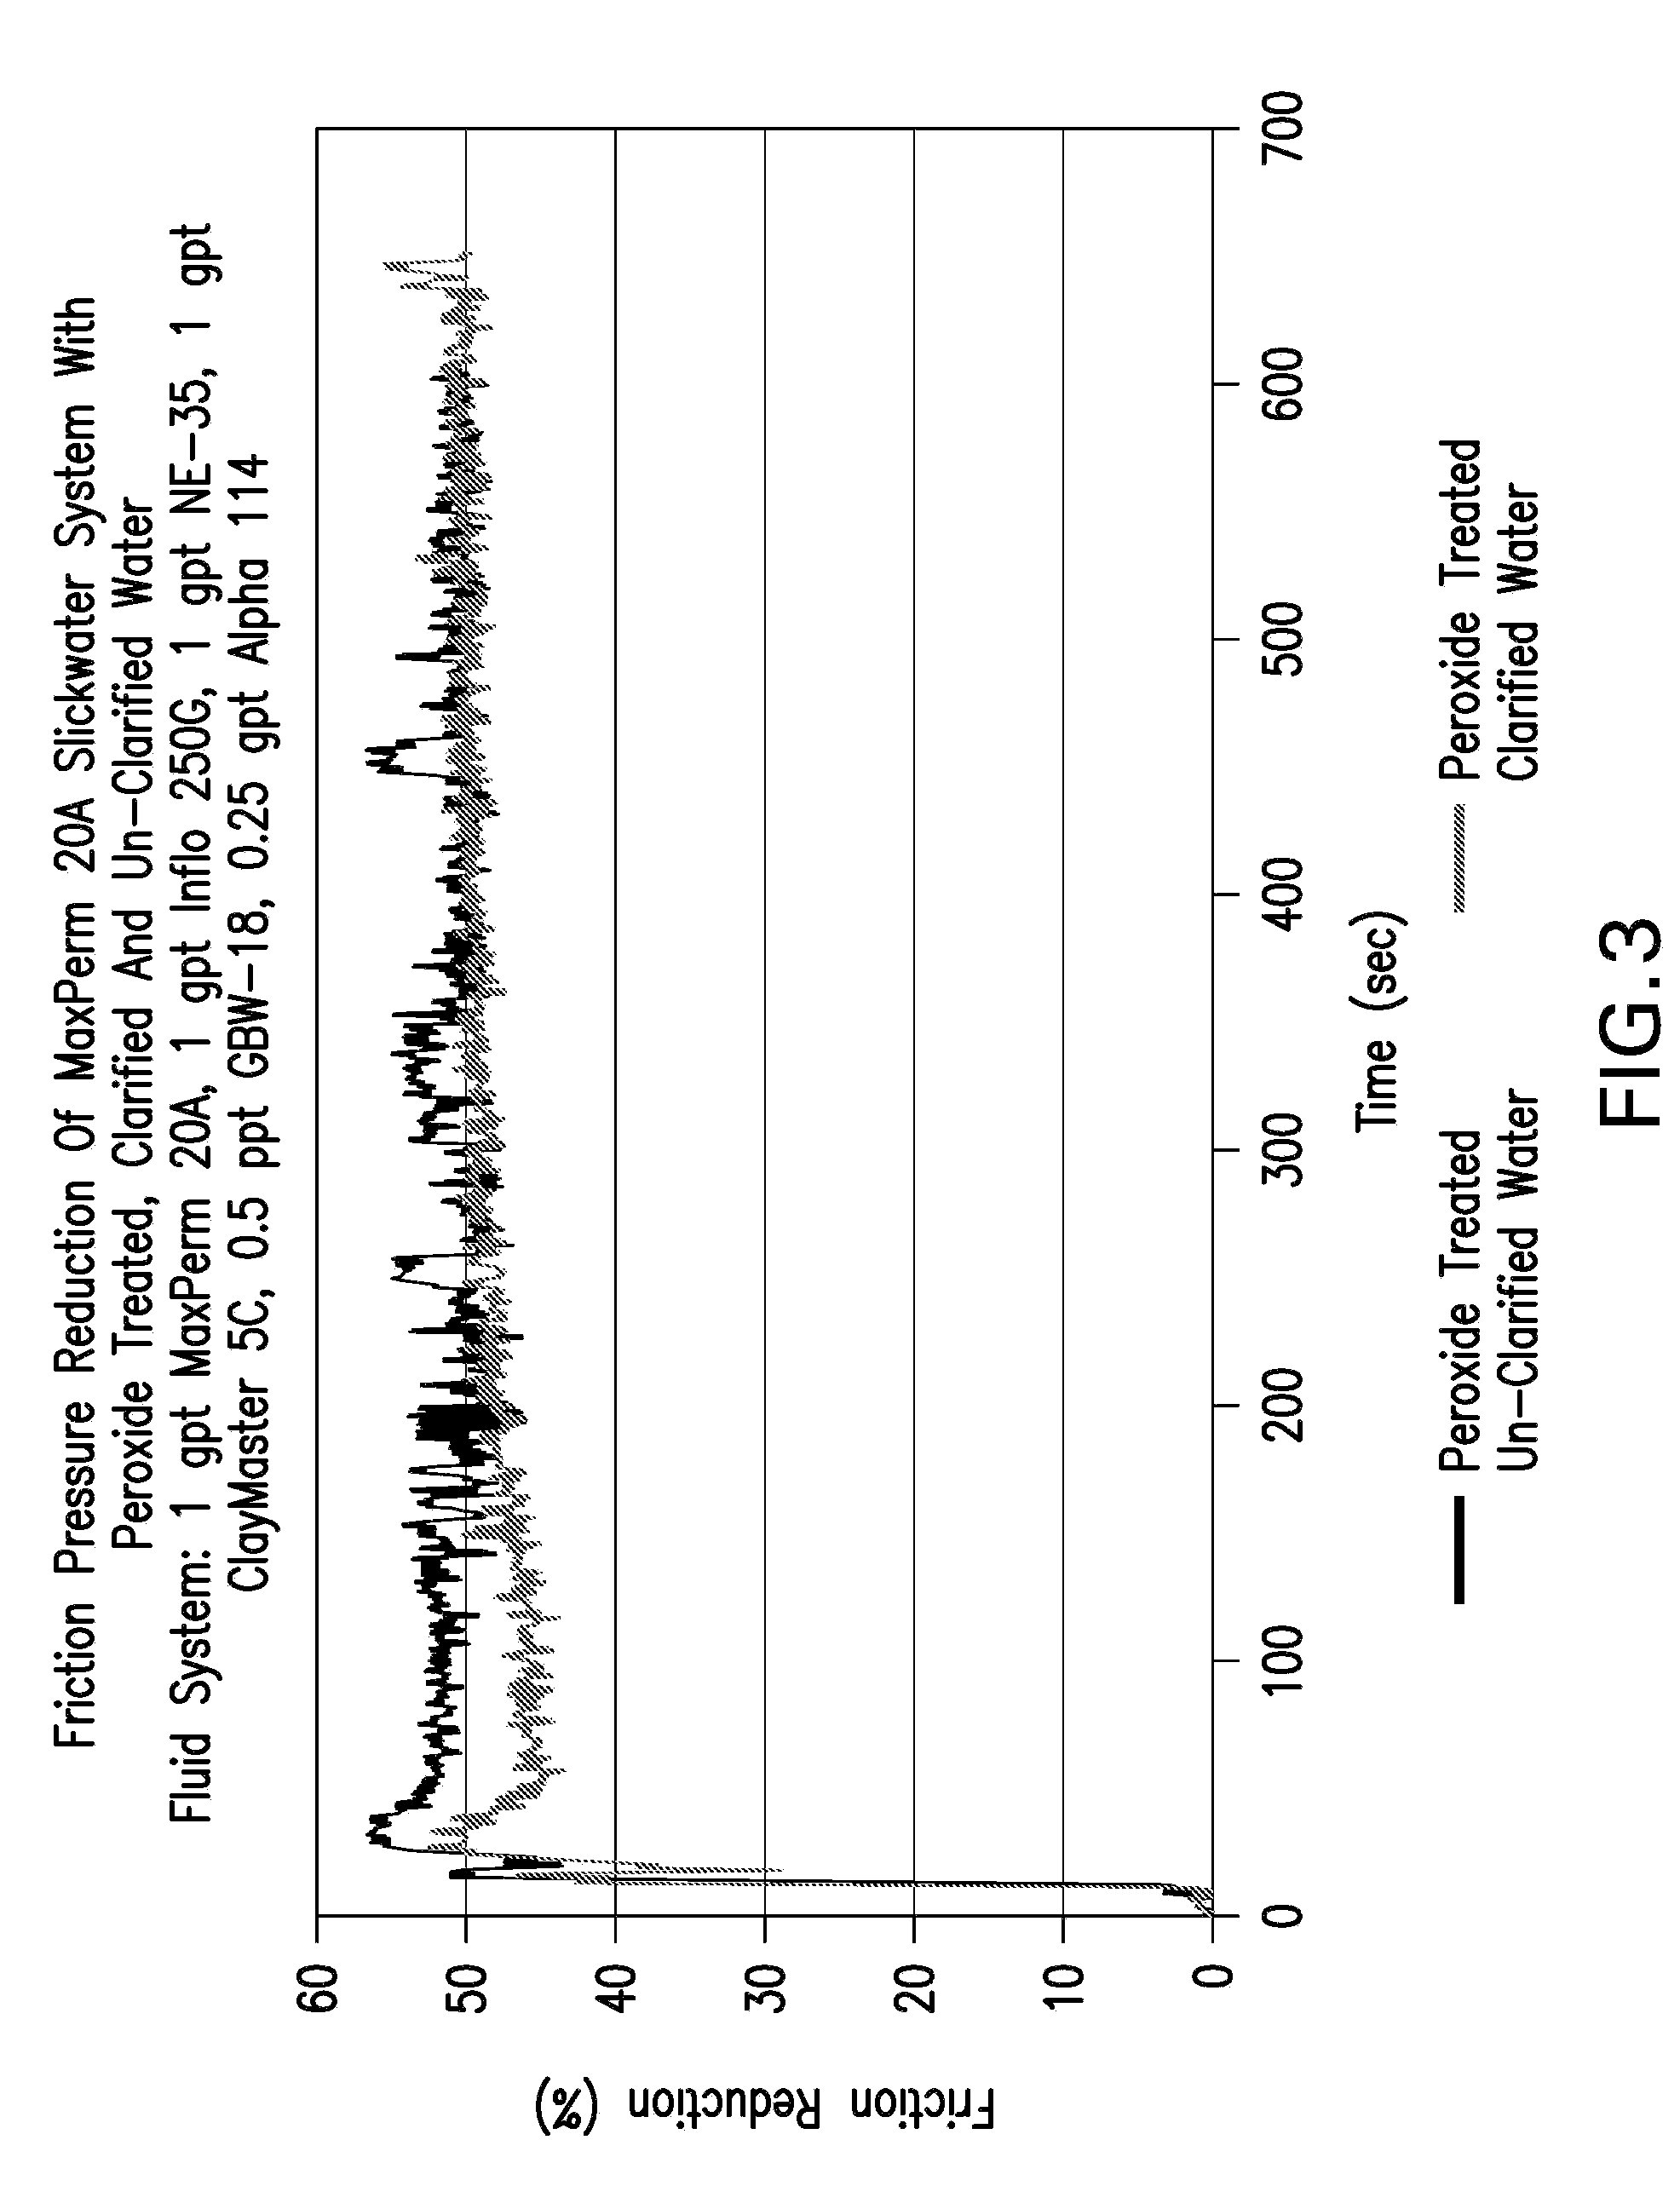 Method for reducing sulfide in oilfield waste water and making treated water